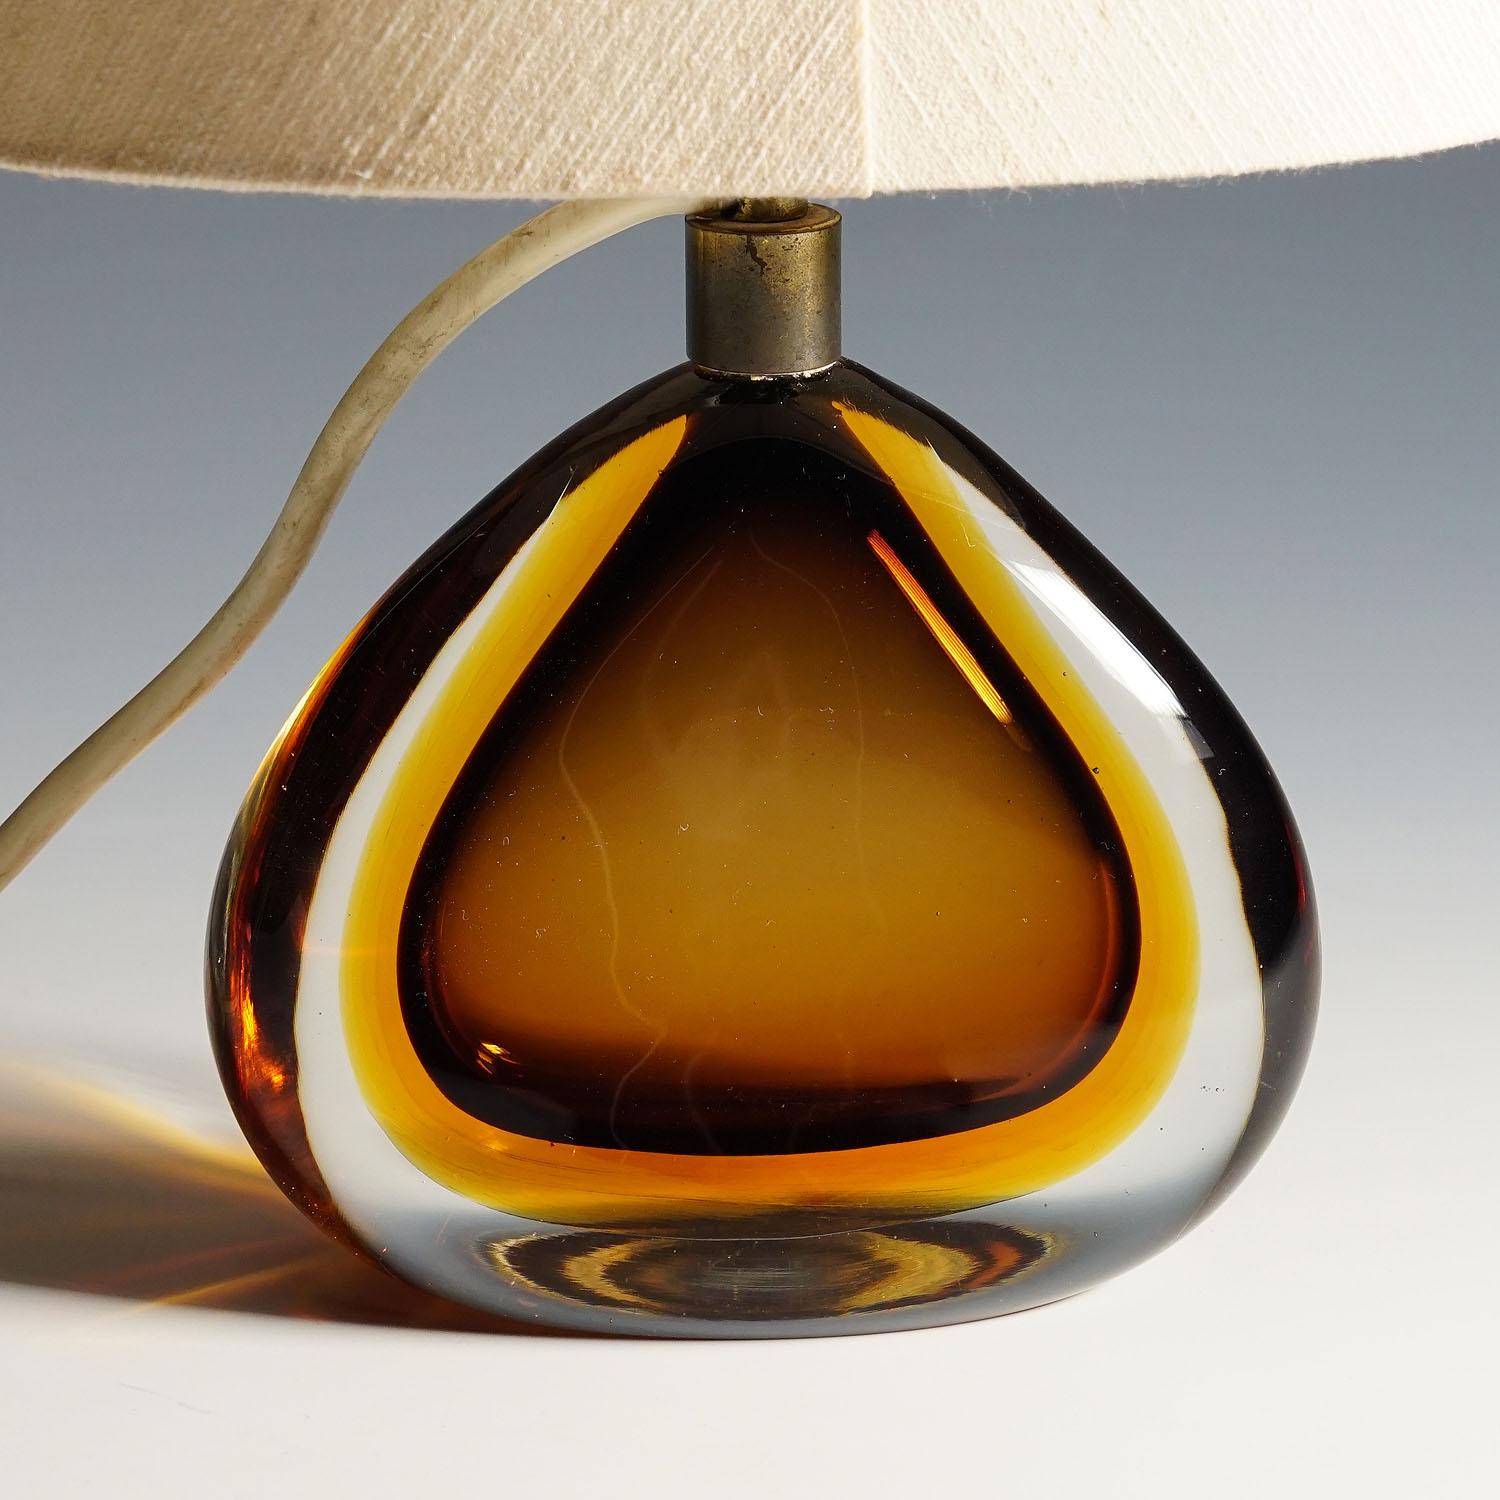 Seguso Vetri d'Arte Murano Sommerso Glass Lamp, 1960s

A vintage Murano sommerso art glass lamp. Designed by Flavio Poli and manufactured by Seguso Vetri d'Arte circa 1960s. Manufactured in thick yellow glass with a burnt topaz inlay. A rare